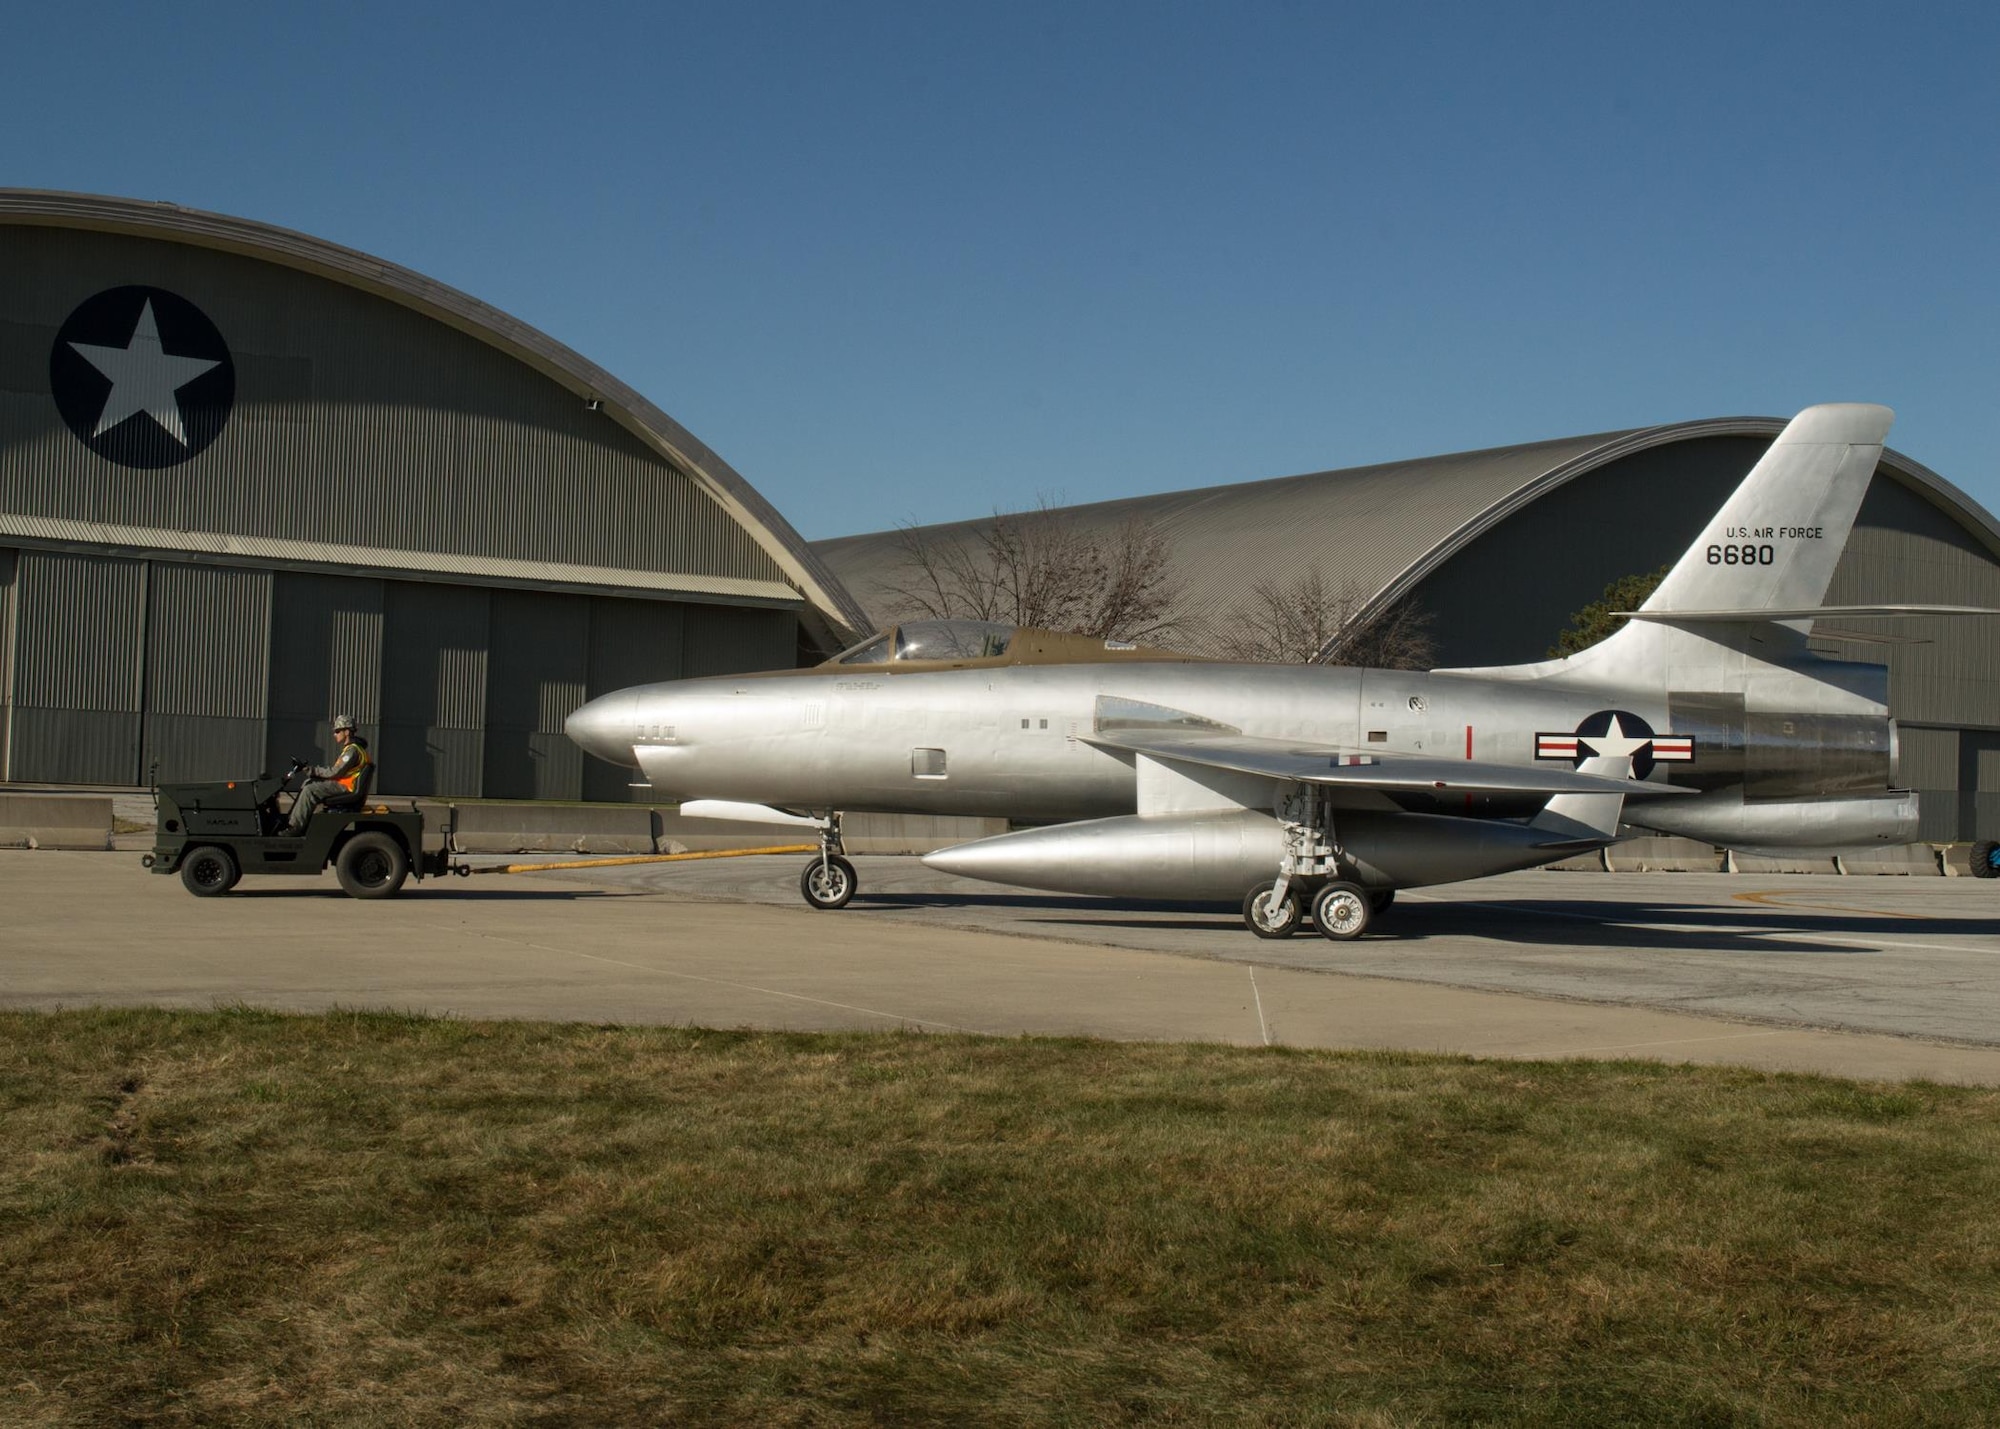 Restoration staff move the Republic XF-91 Thunderceptor into the new fourth building at the National Museum of the U.S. Air Force on Oct. 8, 2015. (U.S. Air Force photo by Ken LaRock)